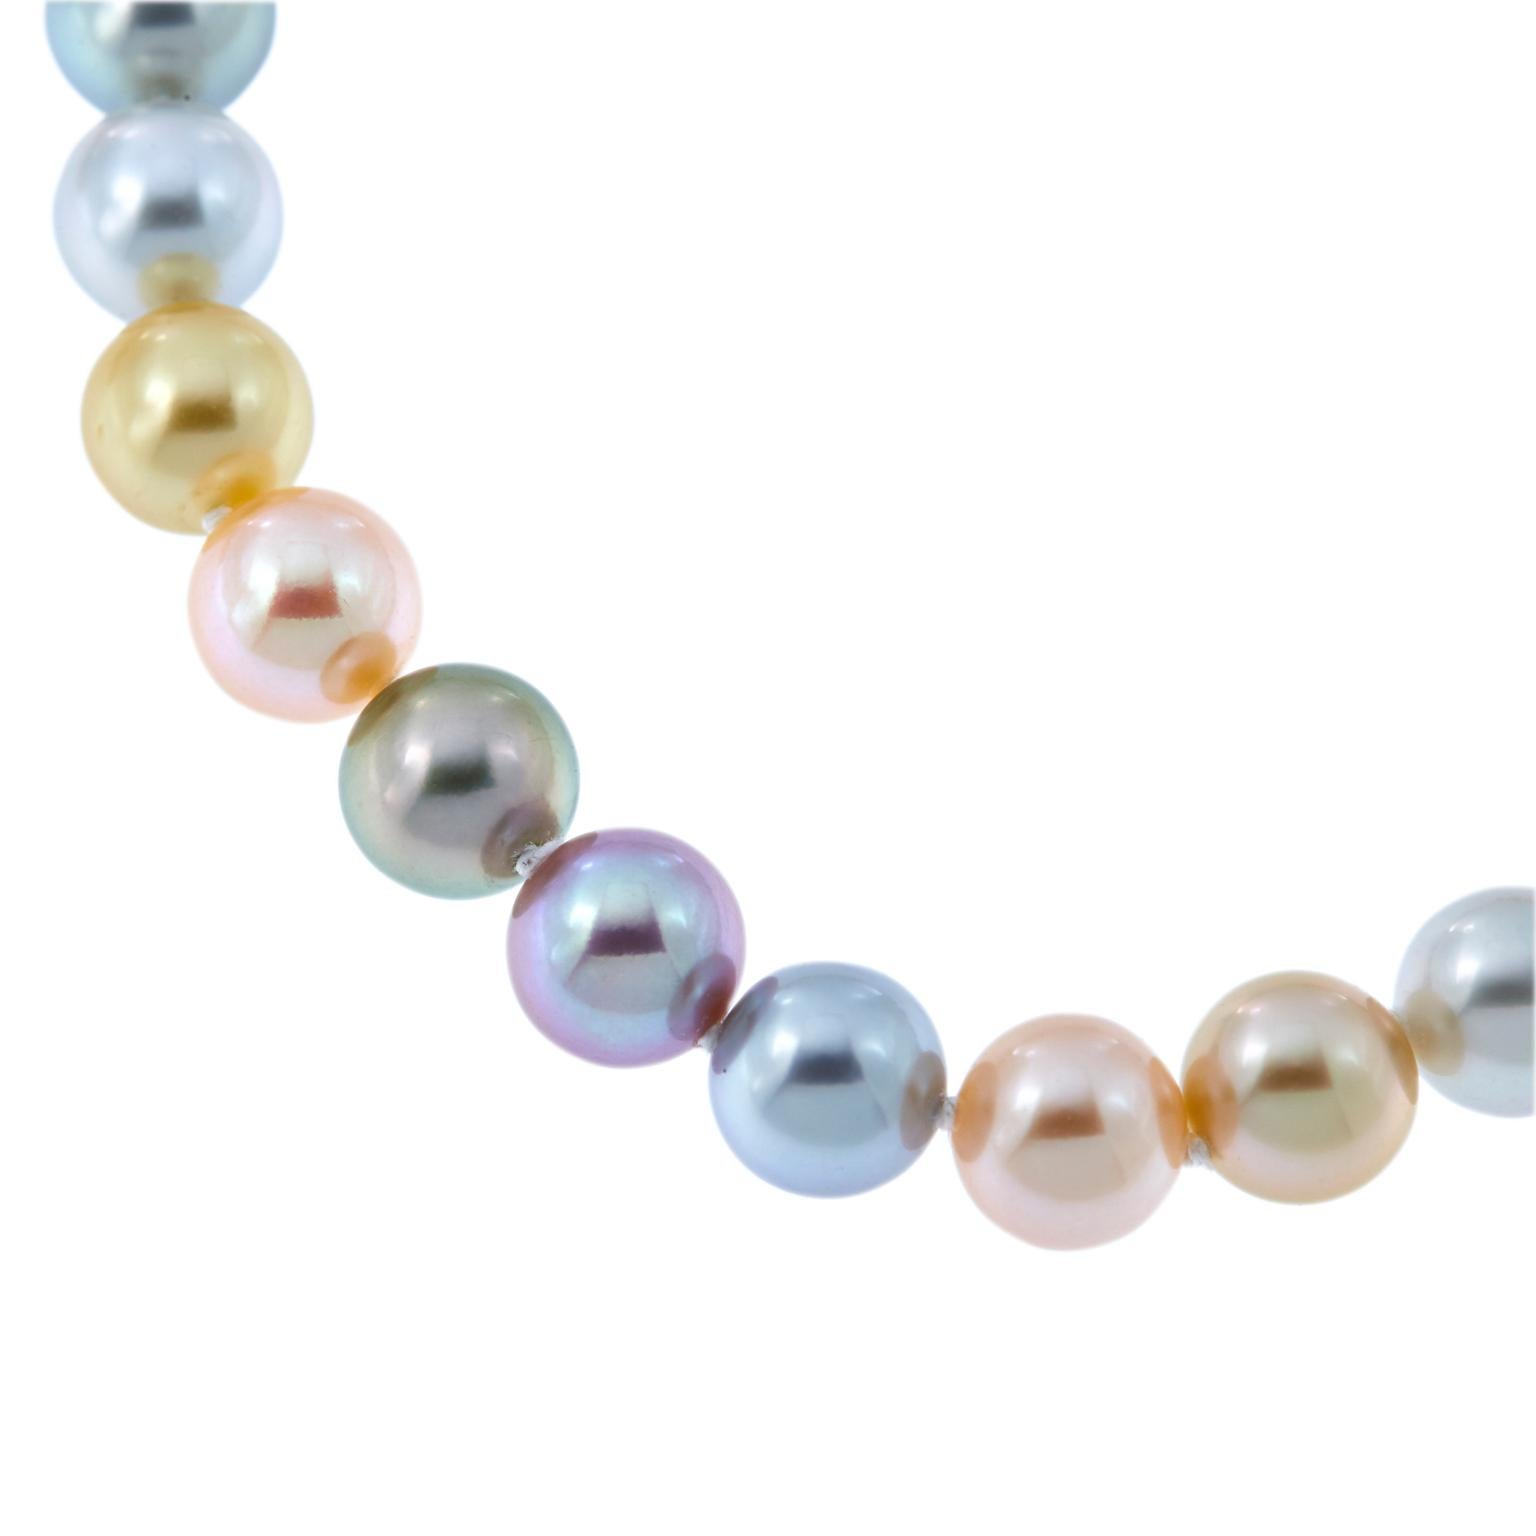 Contemporary Multicolored South Sea and Freshwater Pearls Necklace